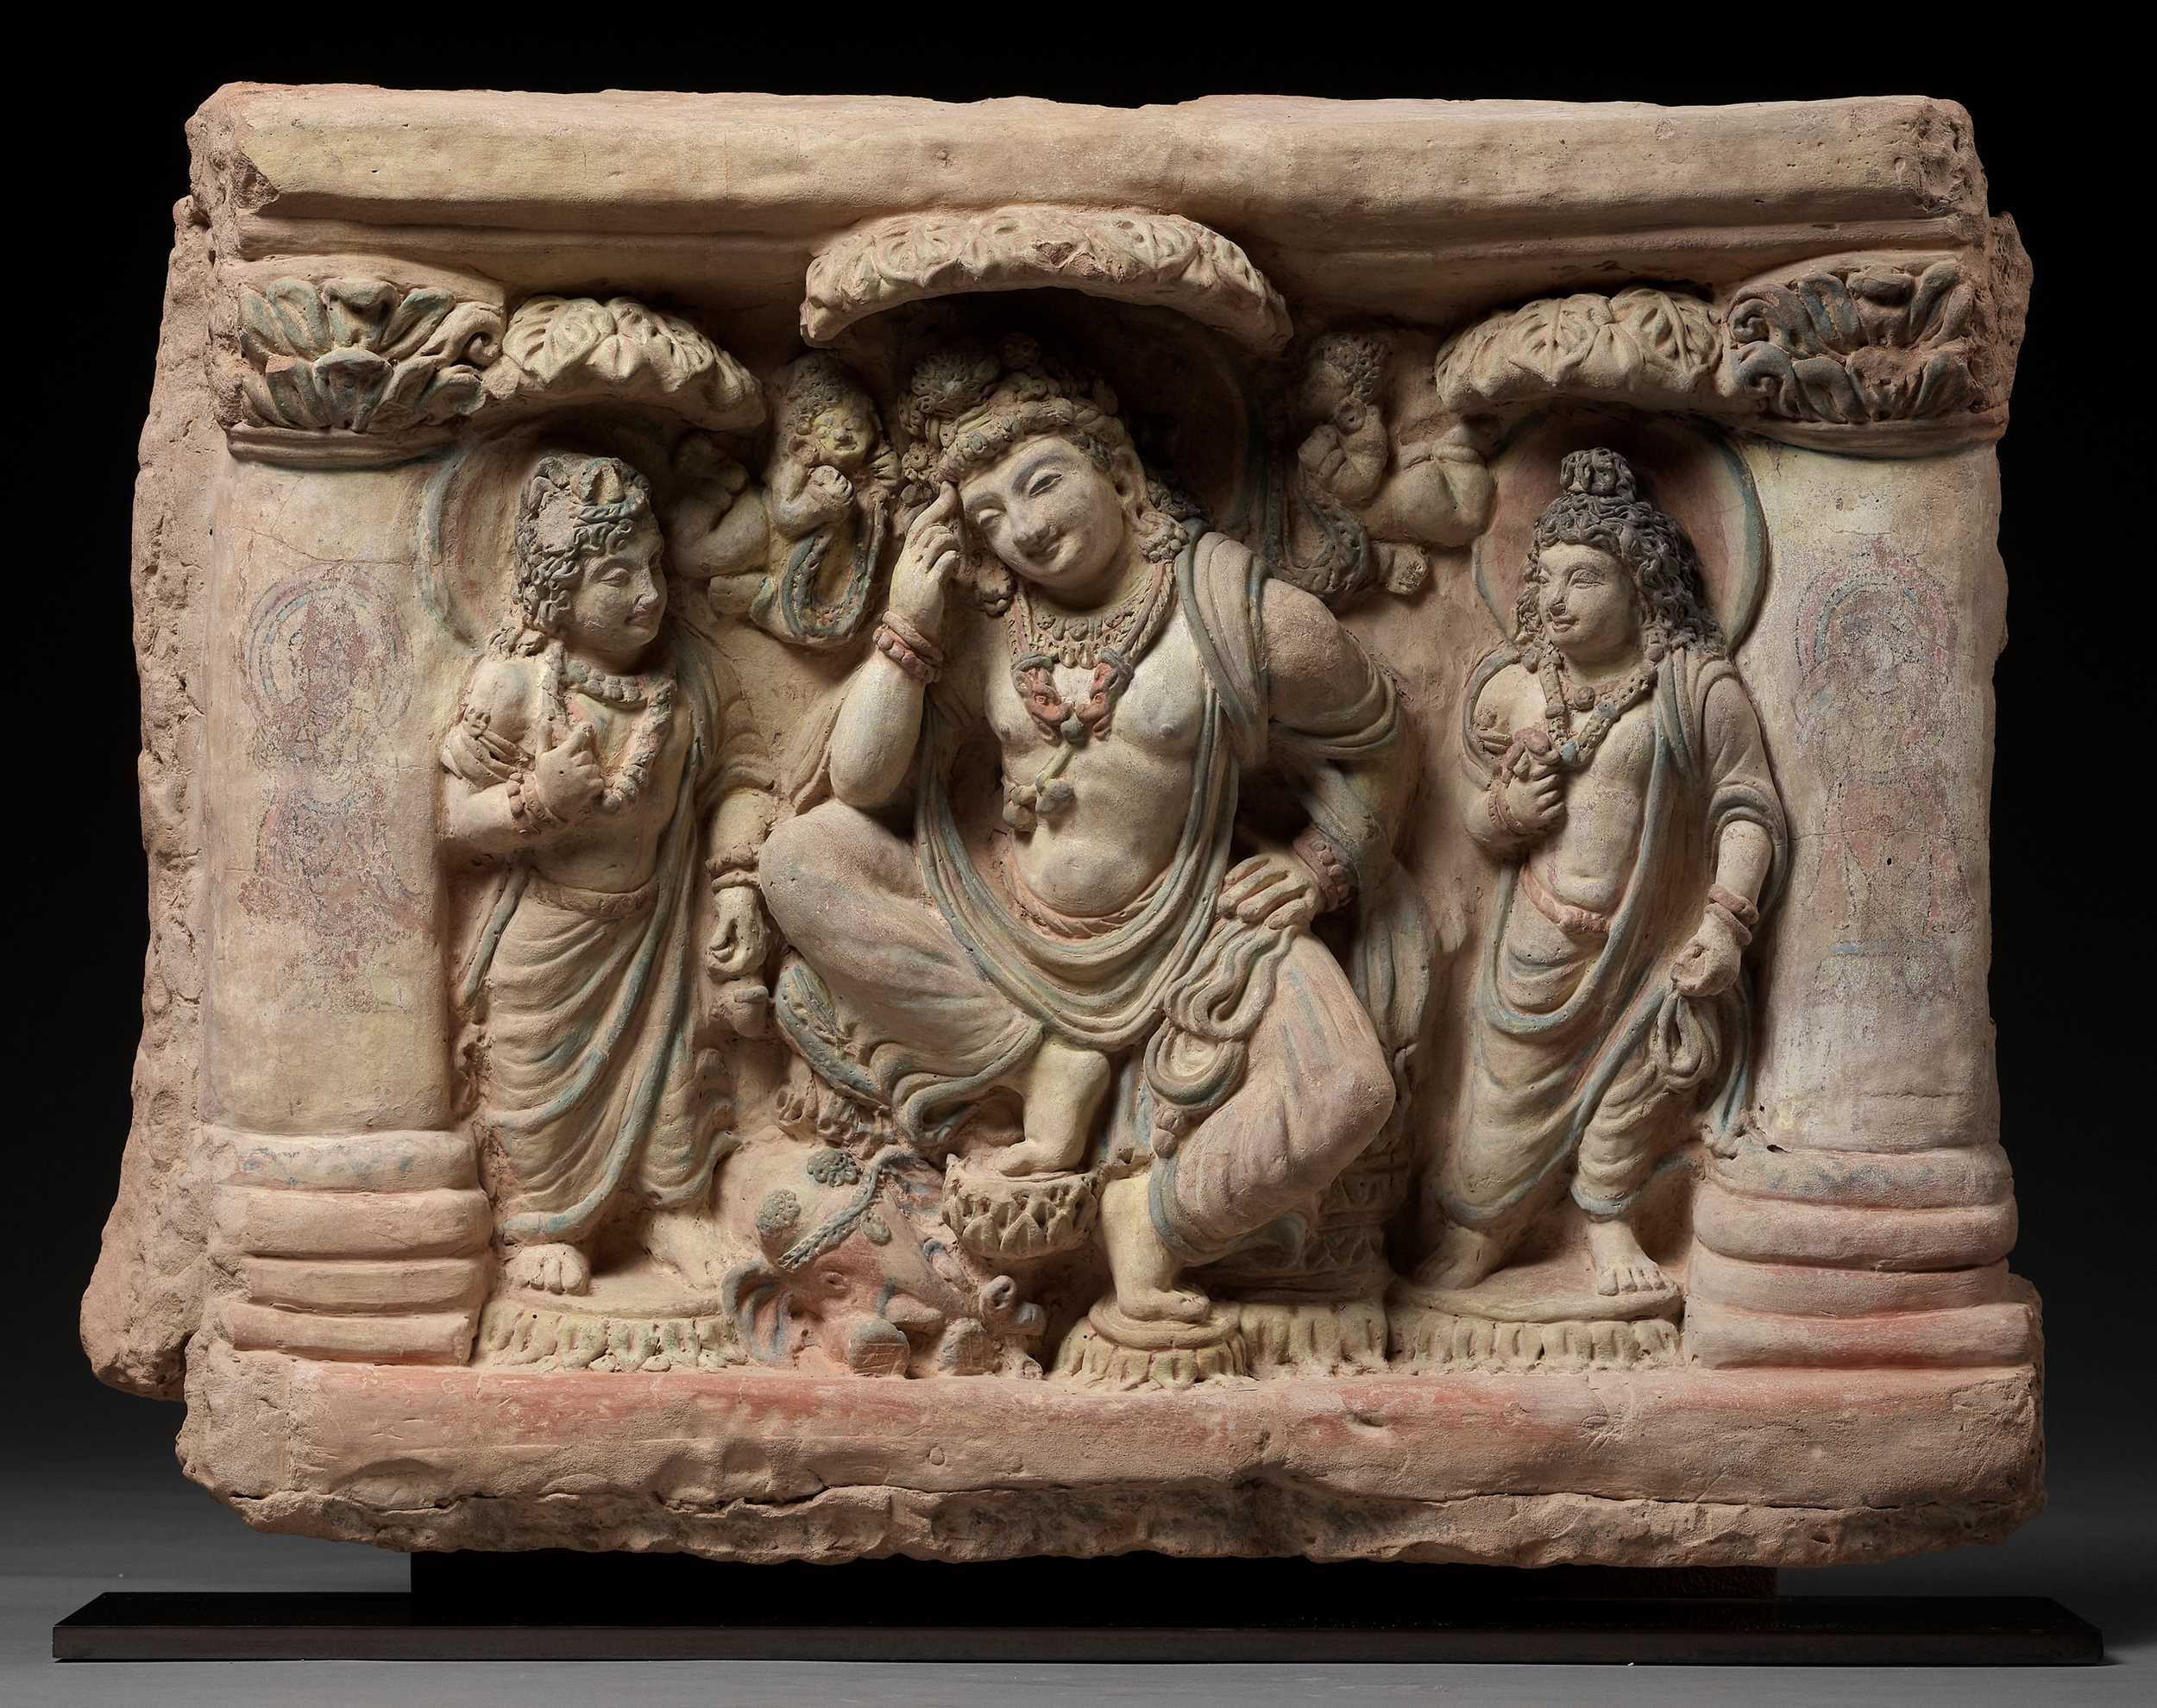 Lot 215 - AN EXTRAORDINARILY RARE AND SPECTACULAR TERRACOTTA RELIEF OF A THINKING PRINCE SIDDHARTA UNDER THE BODHI TREE, ANCIENT REGION OF GANDHARA